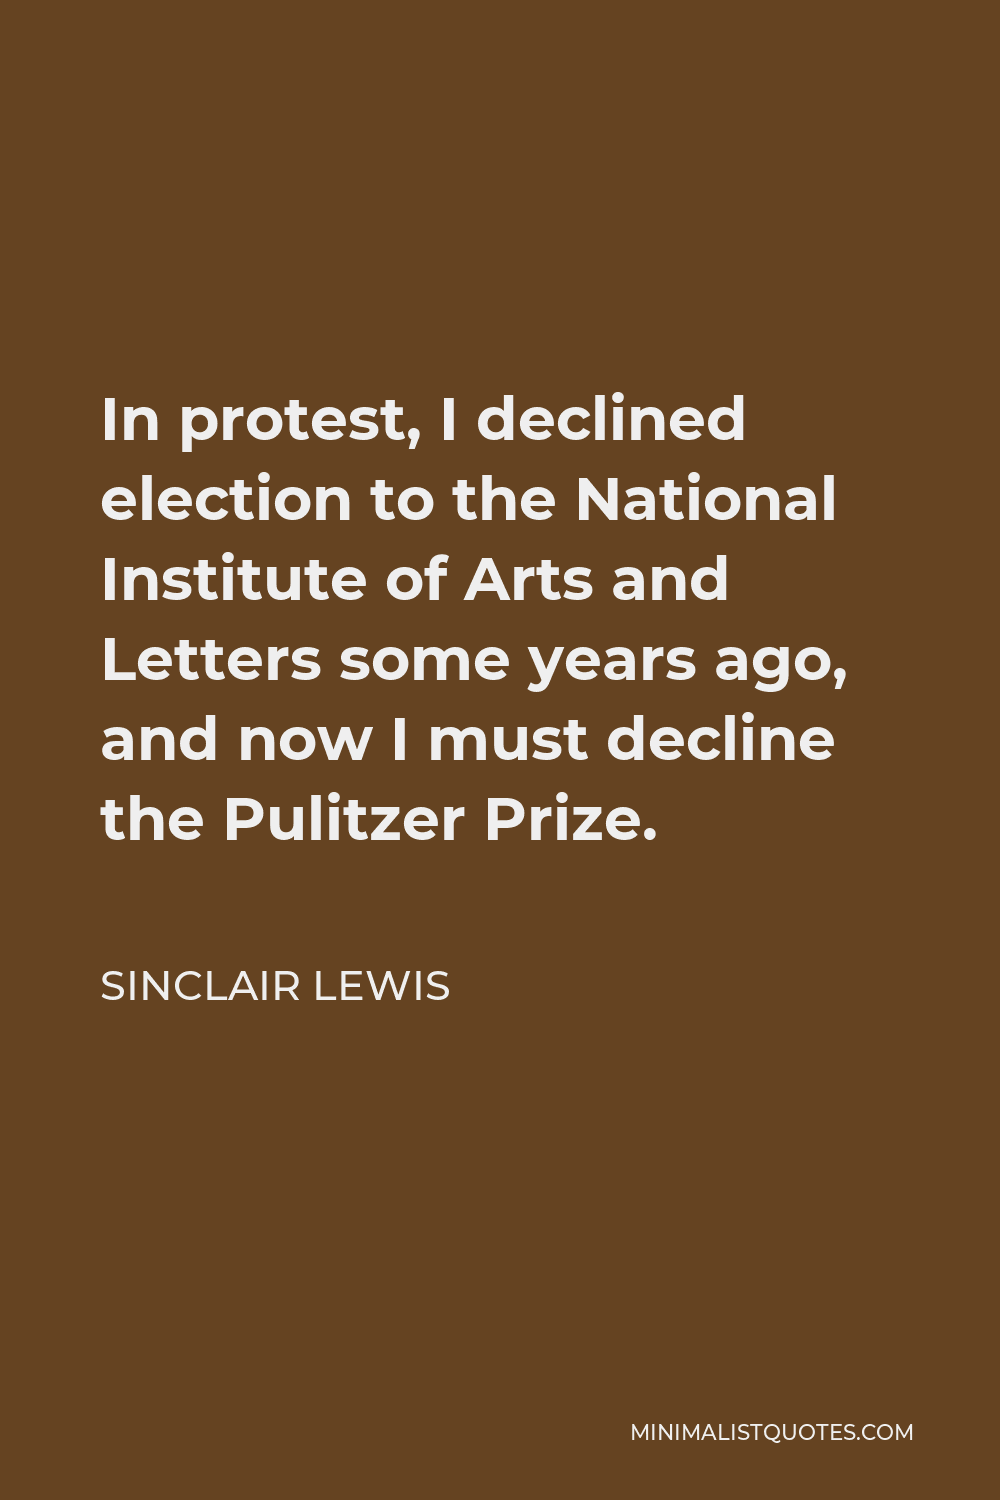 Sinclair Lewis Quote - In protest, I declined election to the National Institute of Arts and Letters some years ago, and now I must decline the Pulitzer Prize.